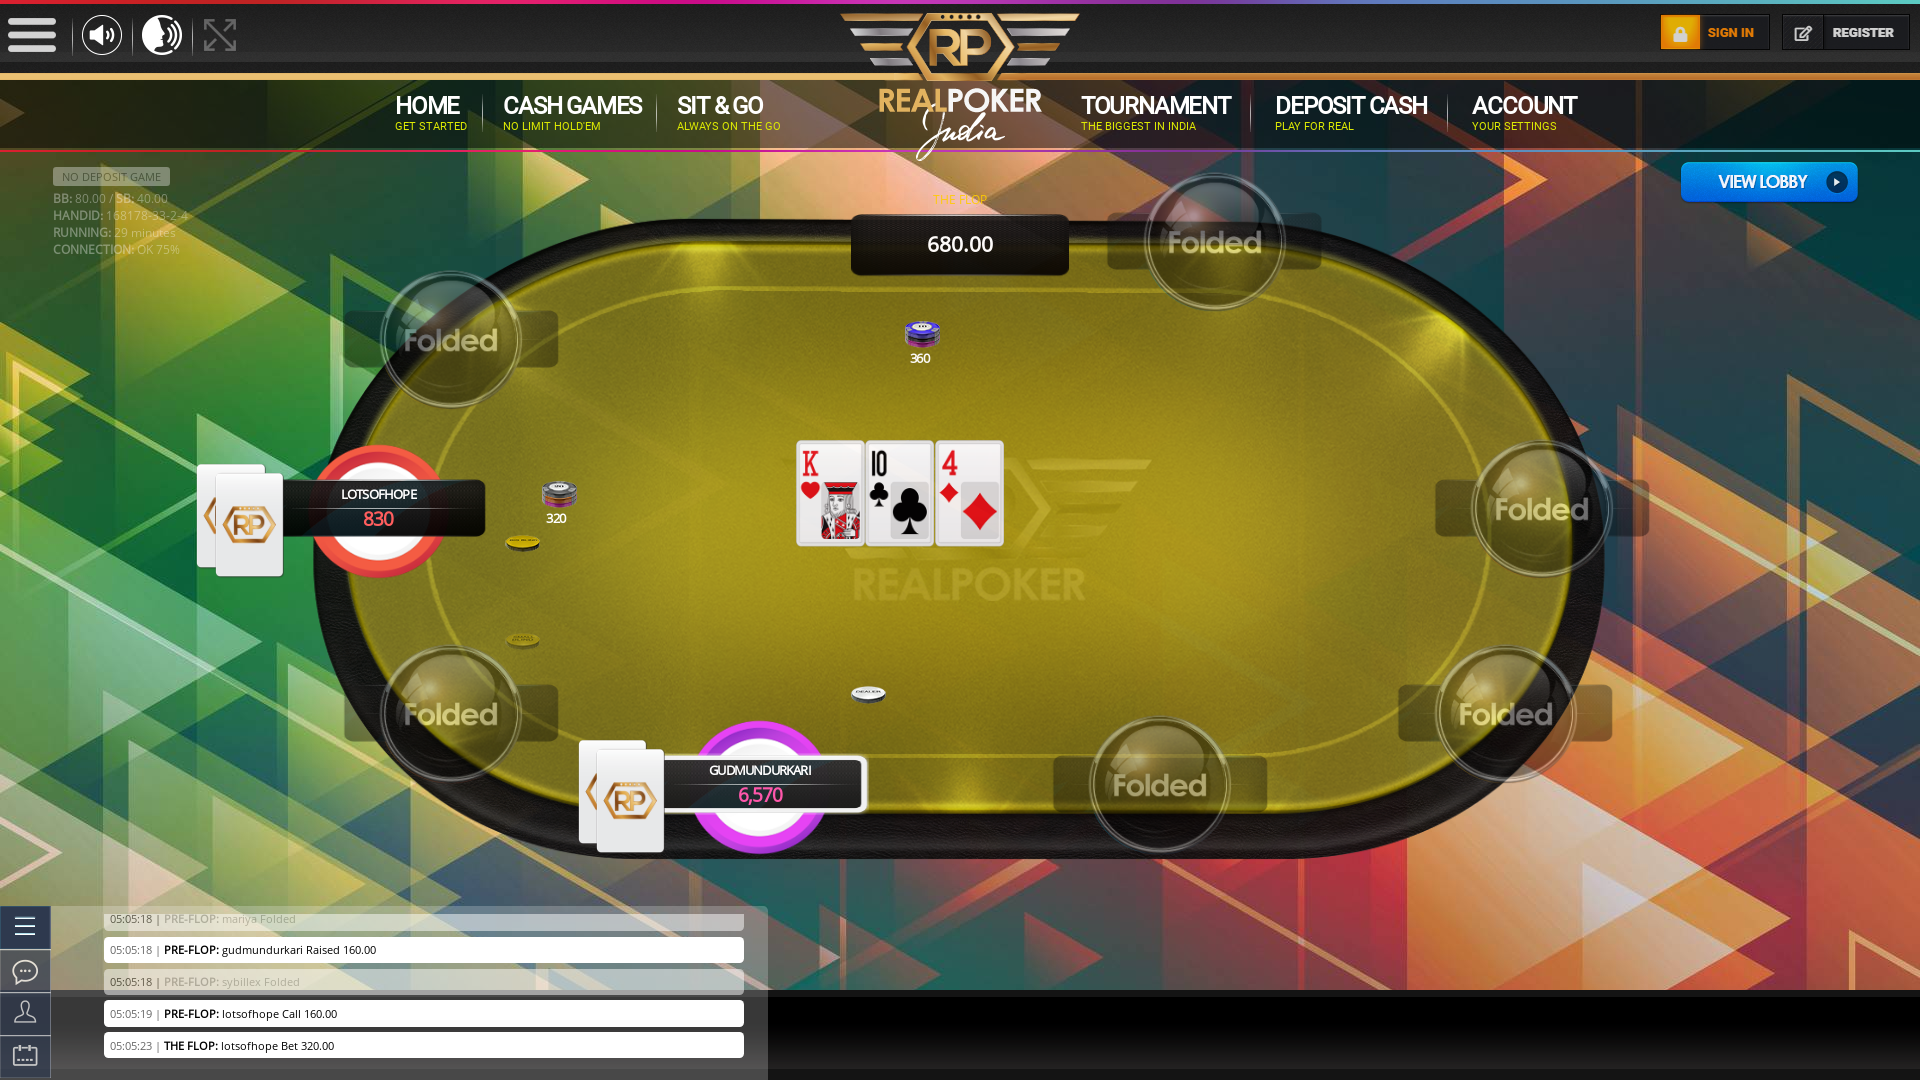 Real poker on a 10 player table in the 29th minute of the game